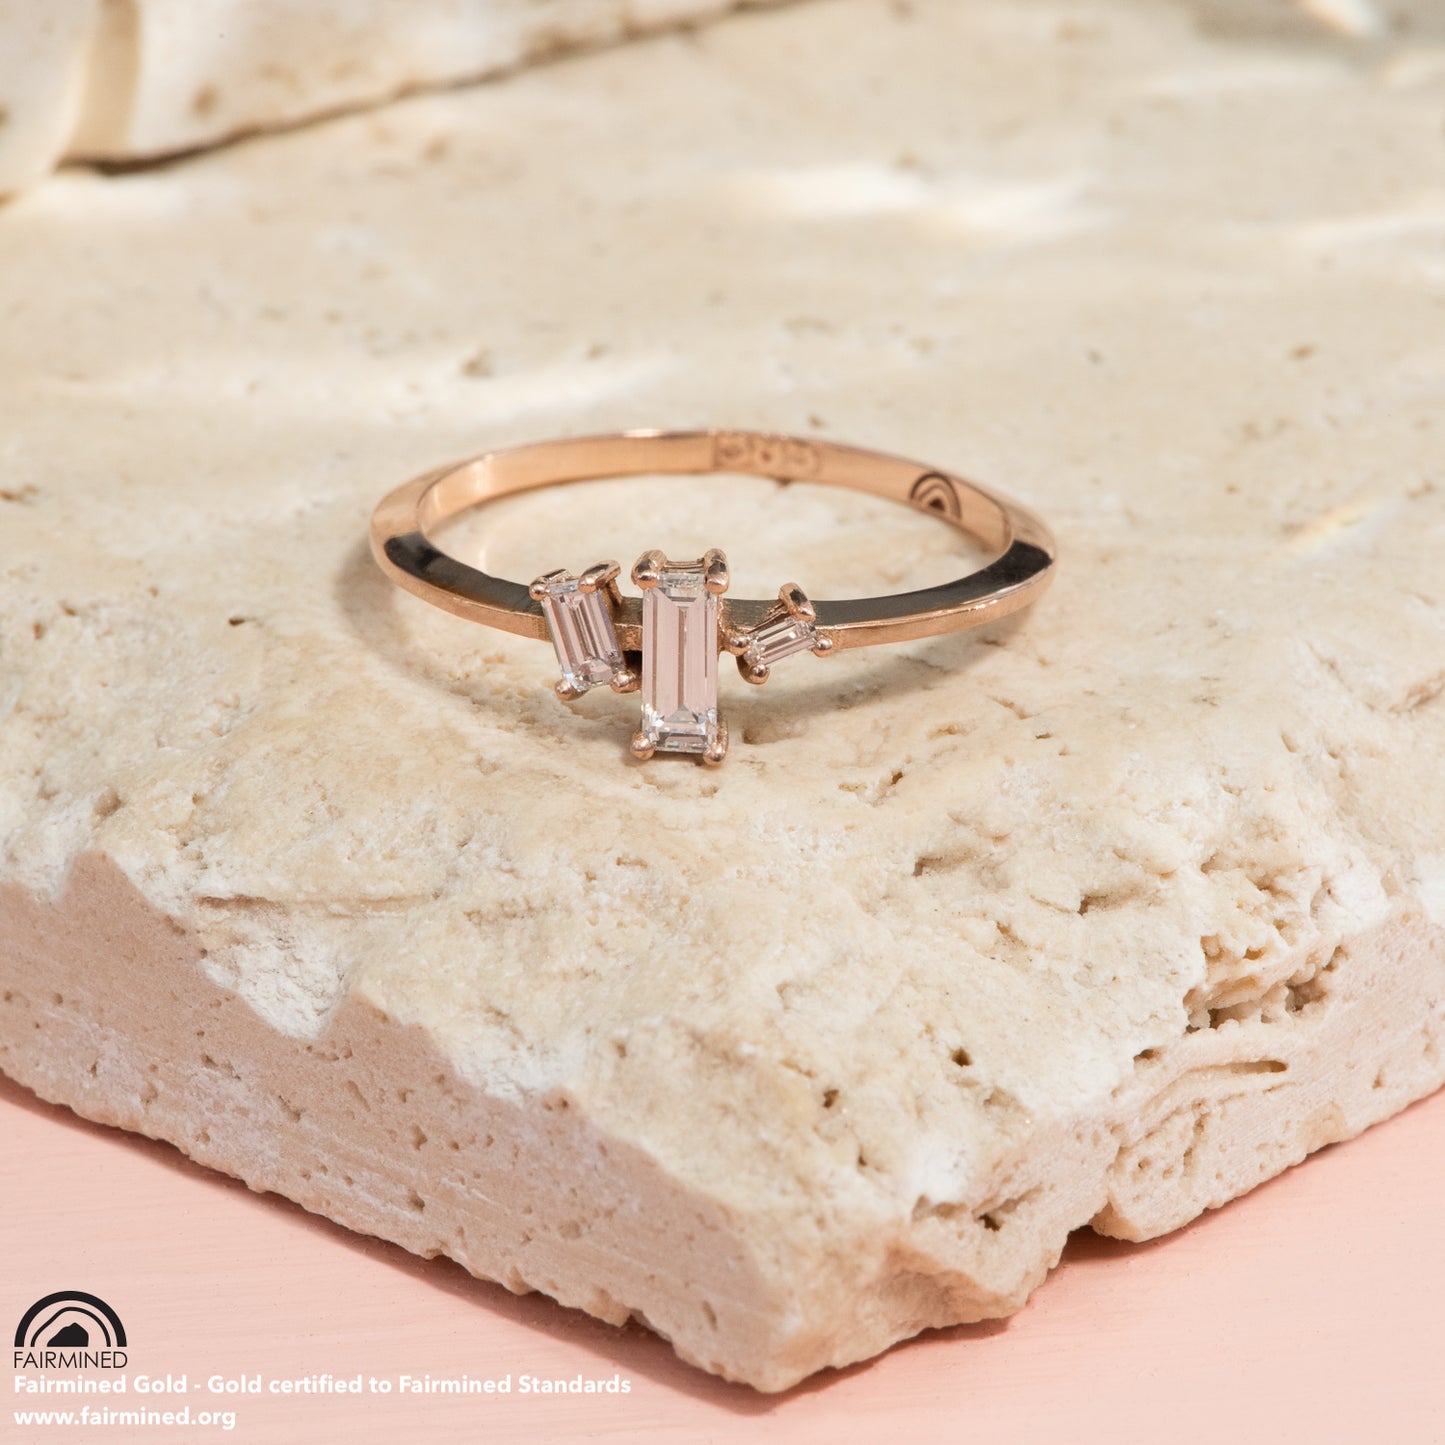 3 baguette cut diamonds sit asymmetrically on a polished rose gold band.